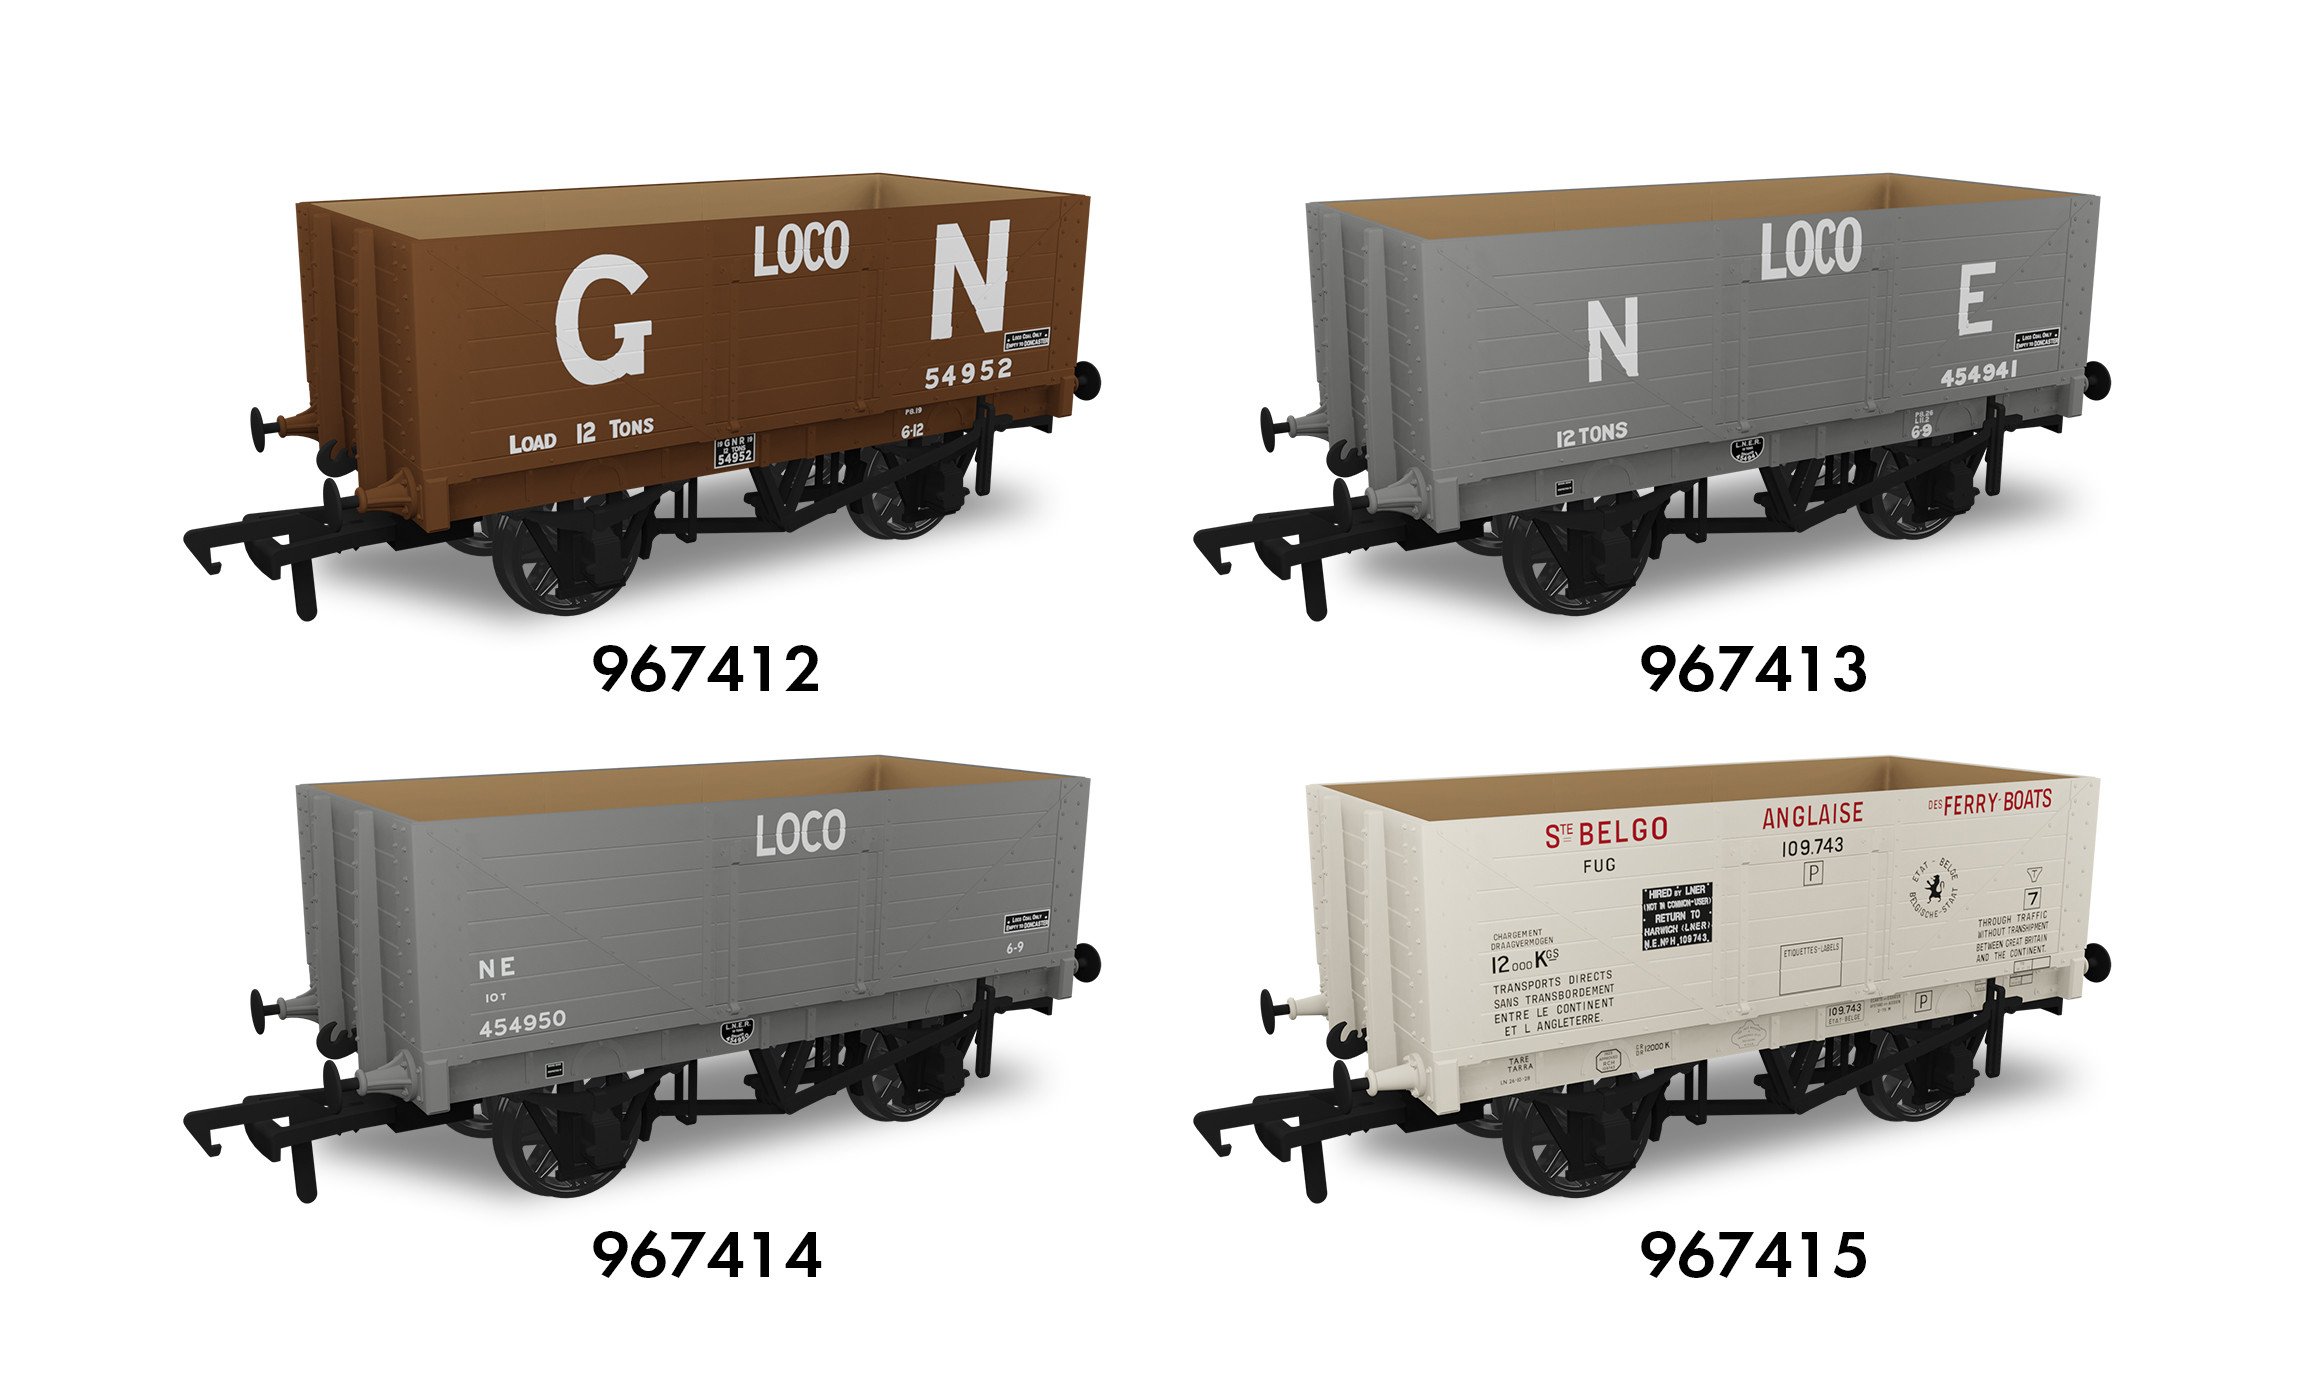 LNER and GNR liveries are also planned.